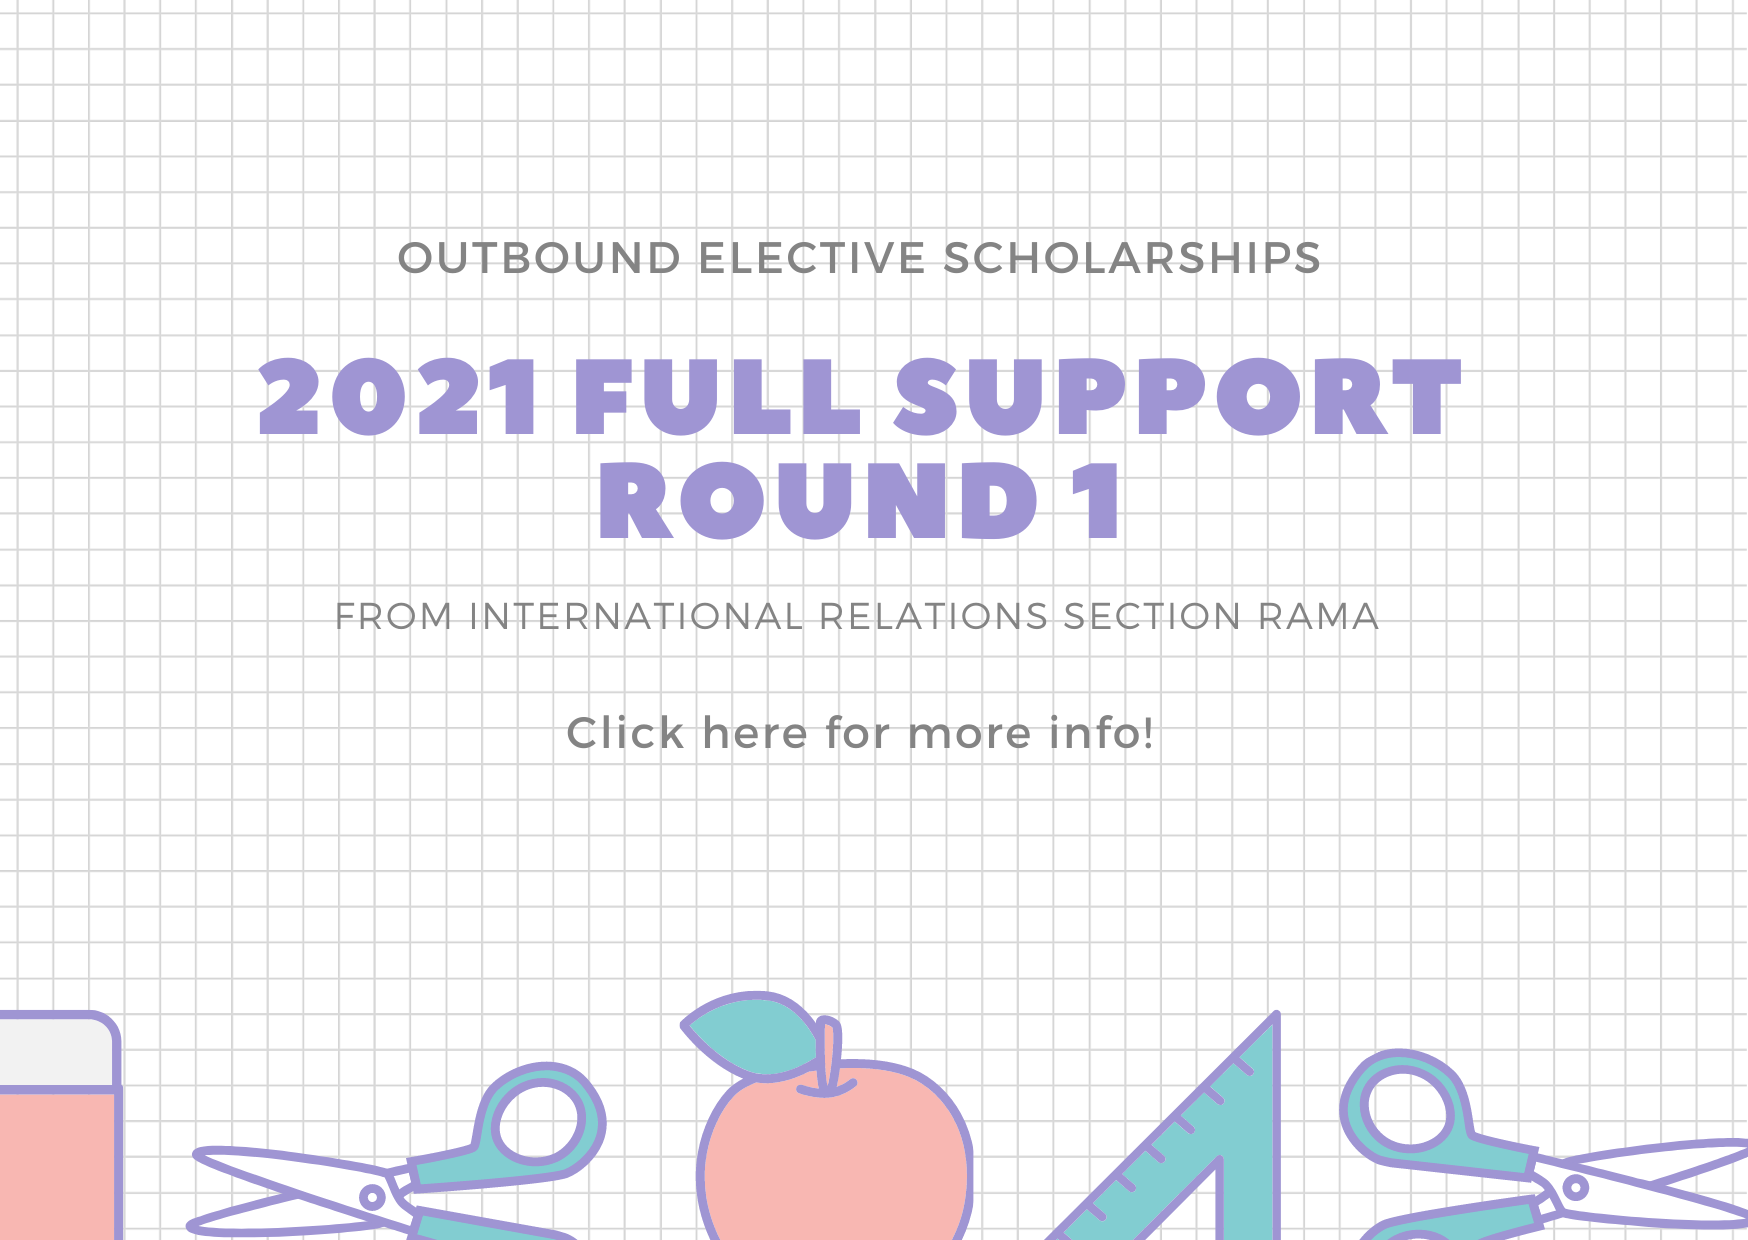 Outbound Full Support Scholarship Application 2021 Round 1 Banner